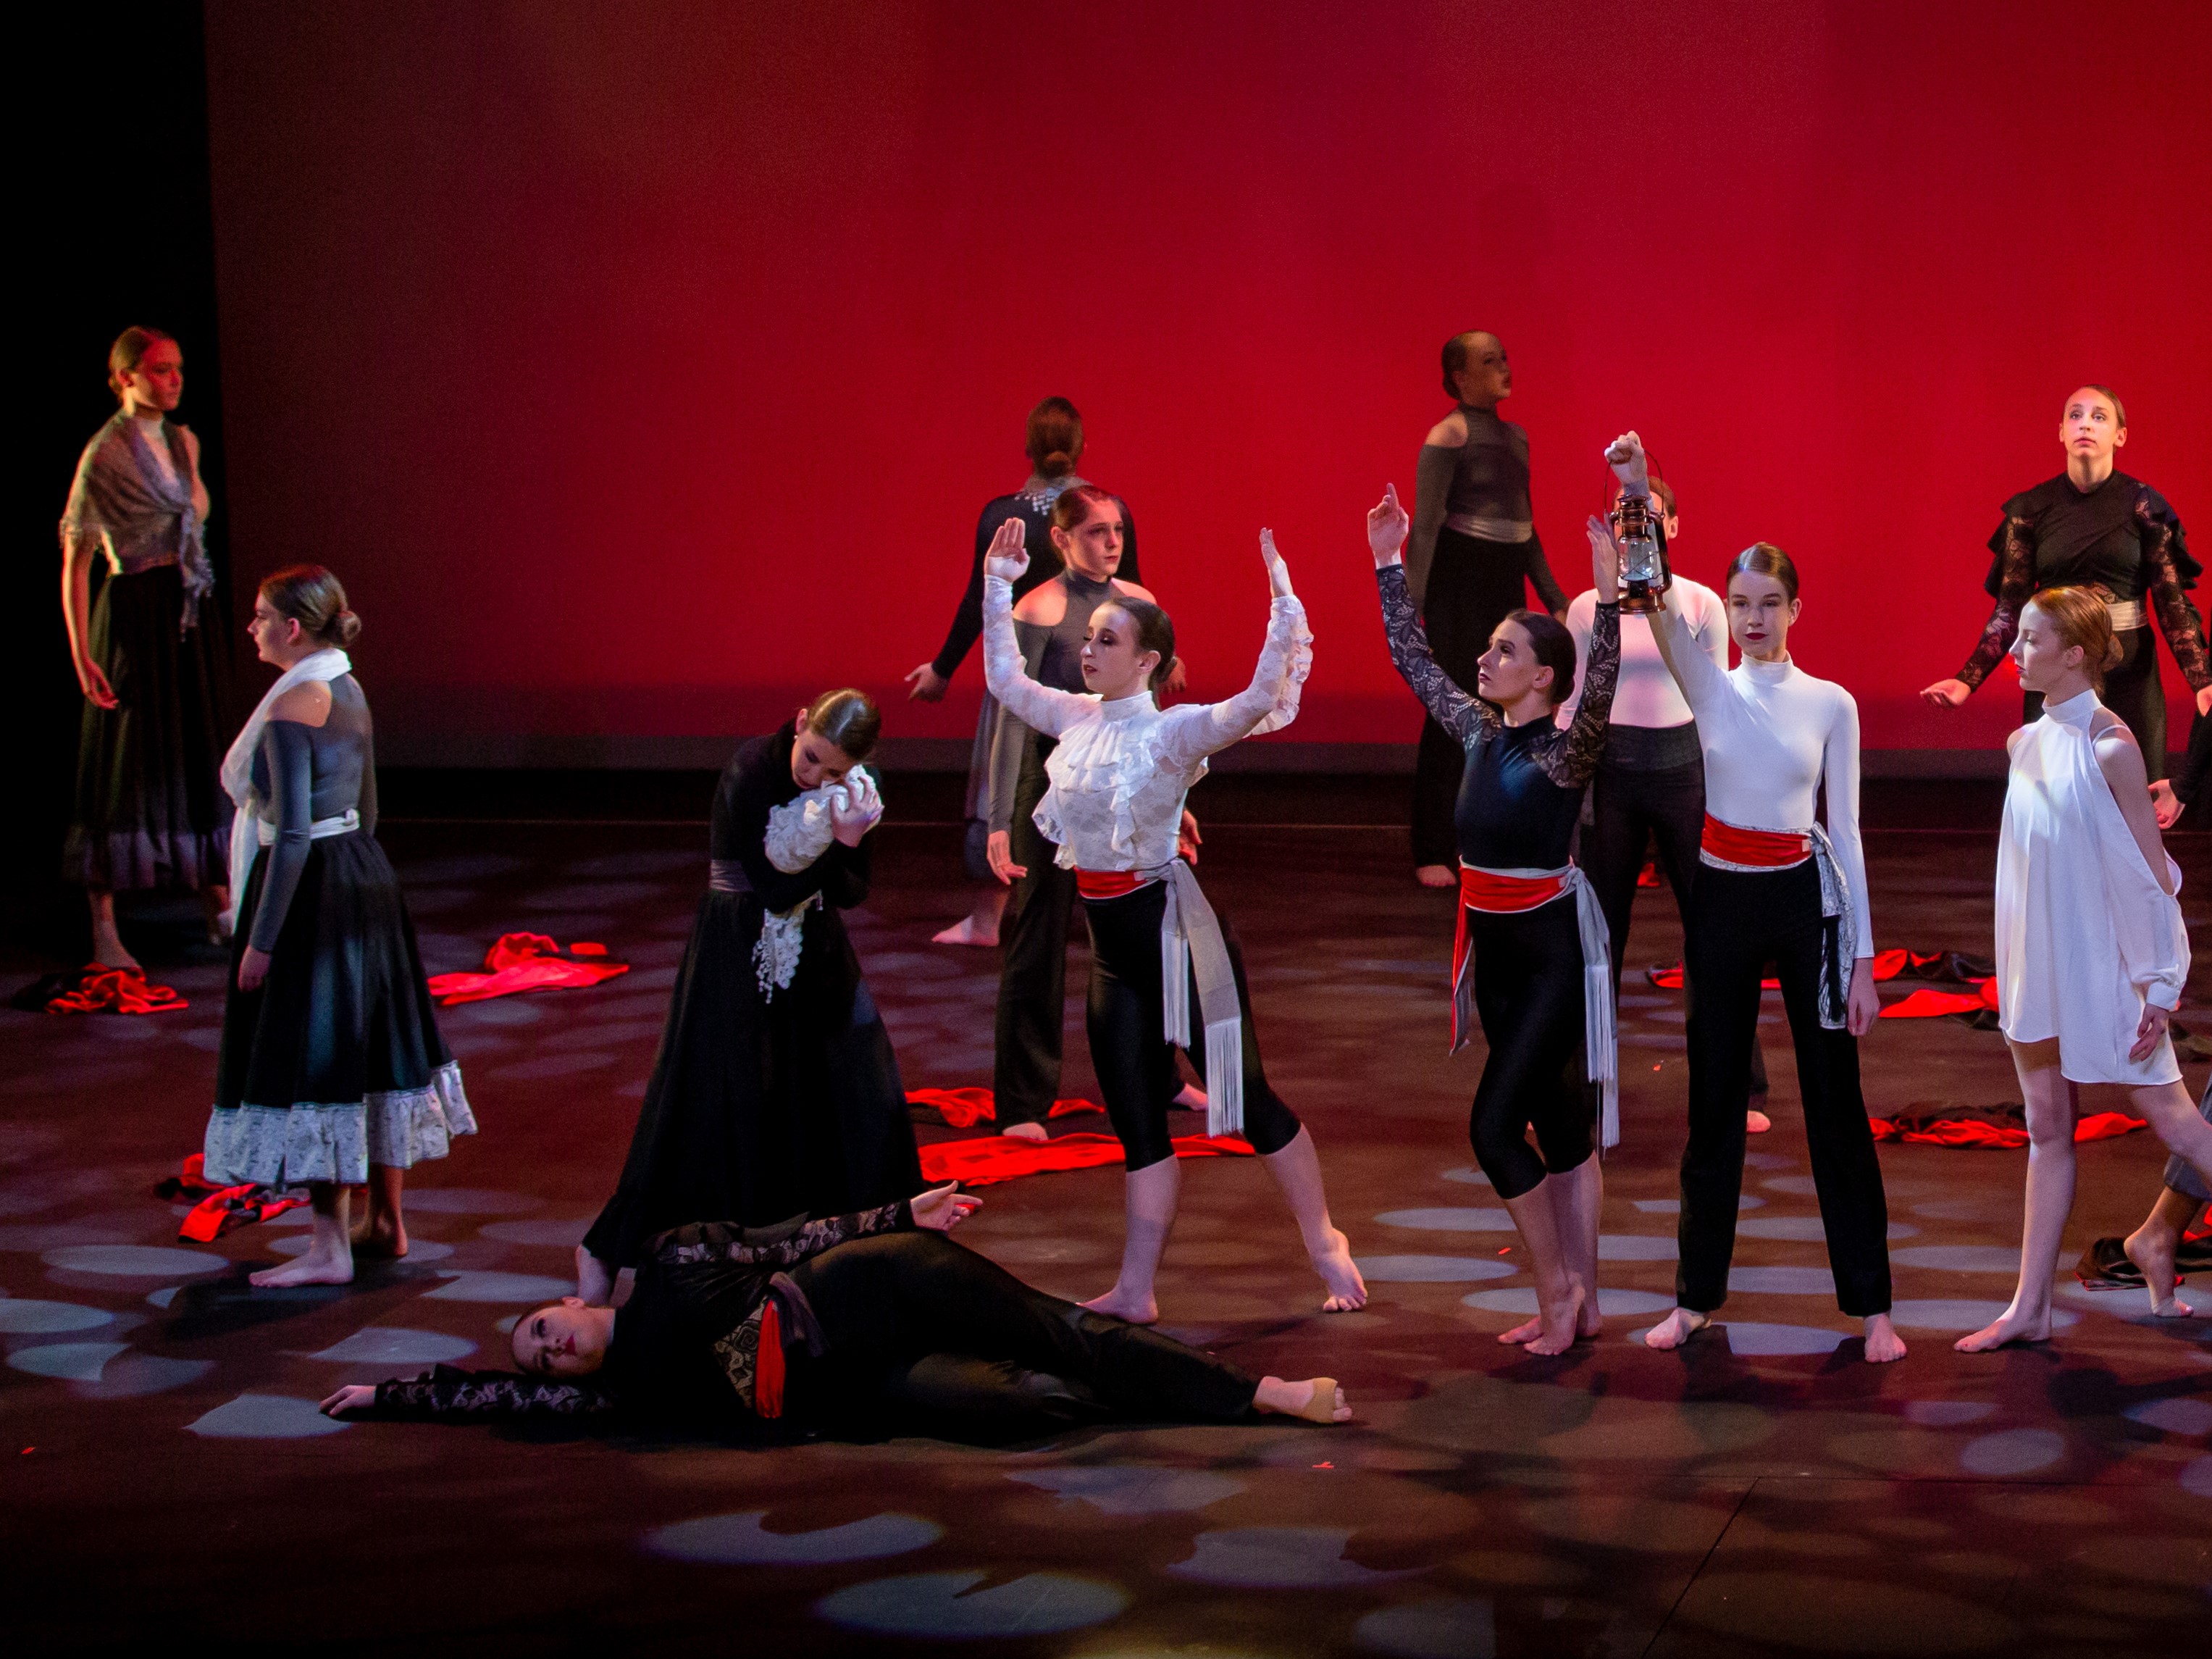 dance ensemble on stage in costumes under red lighting